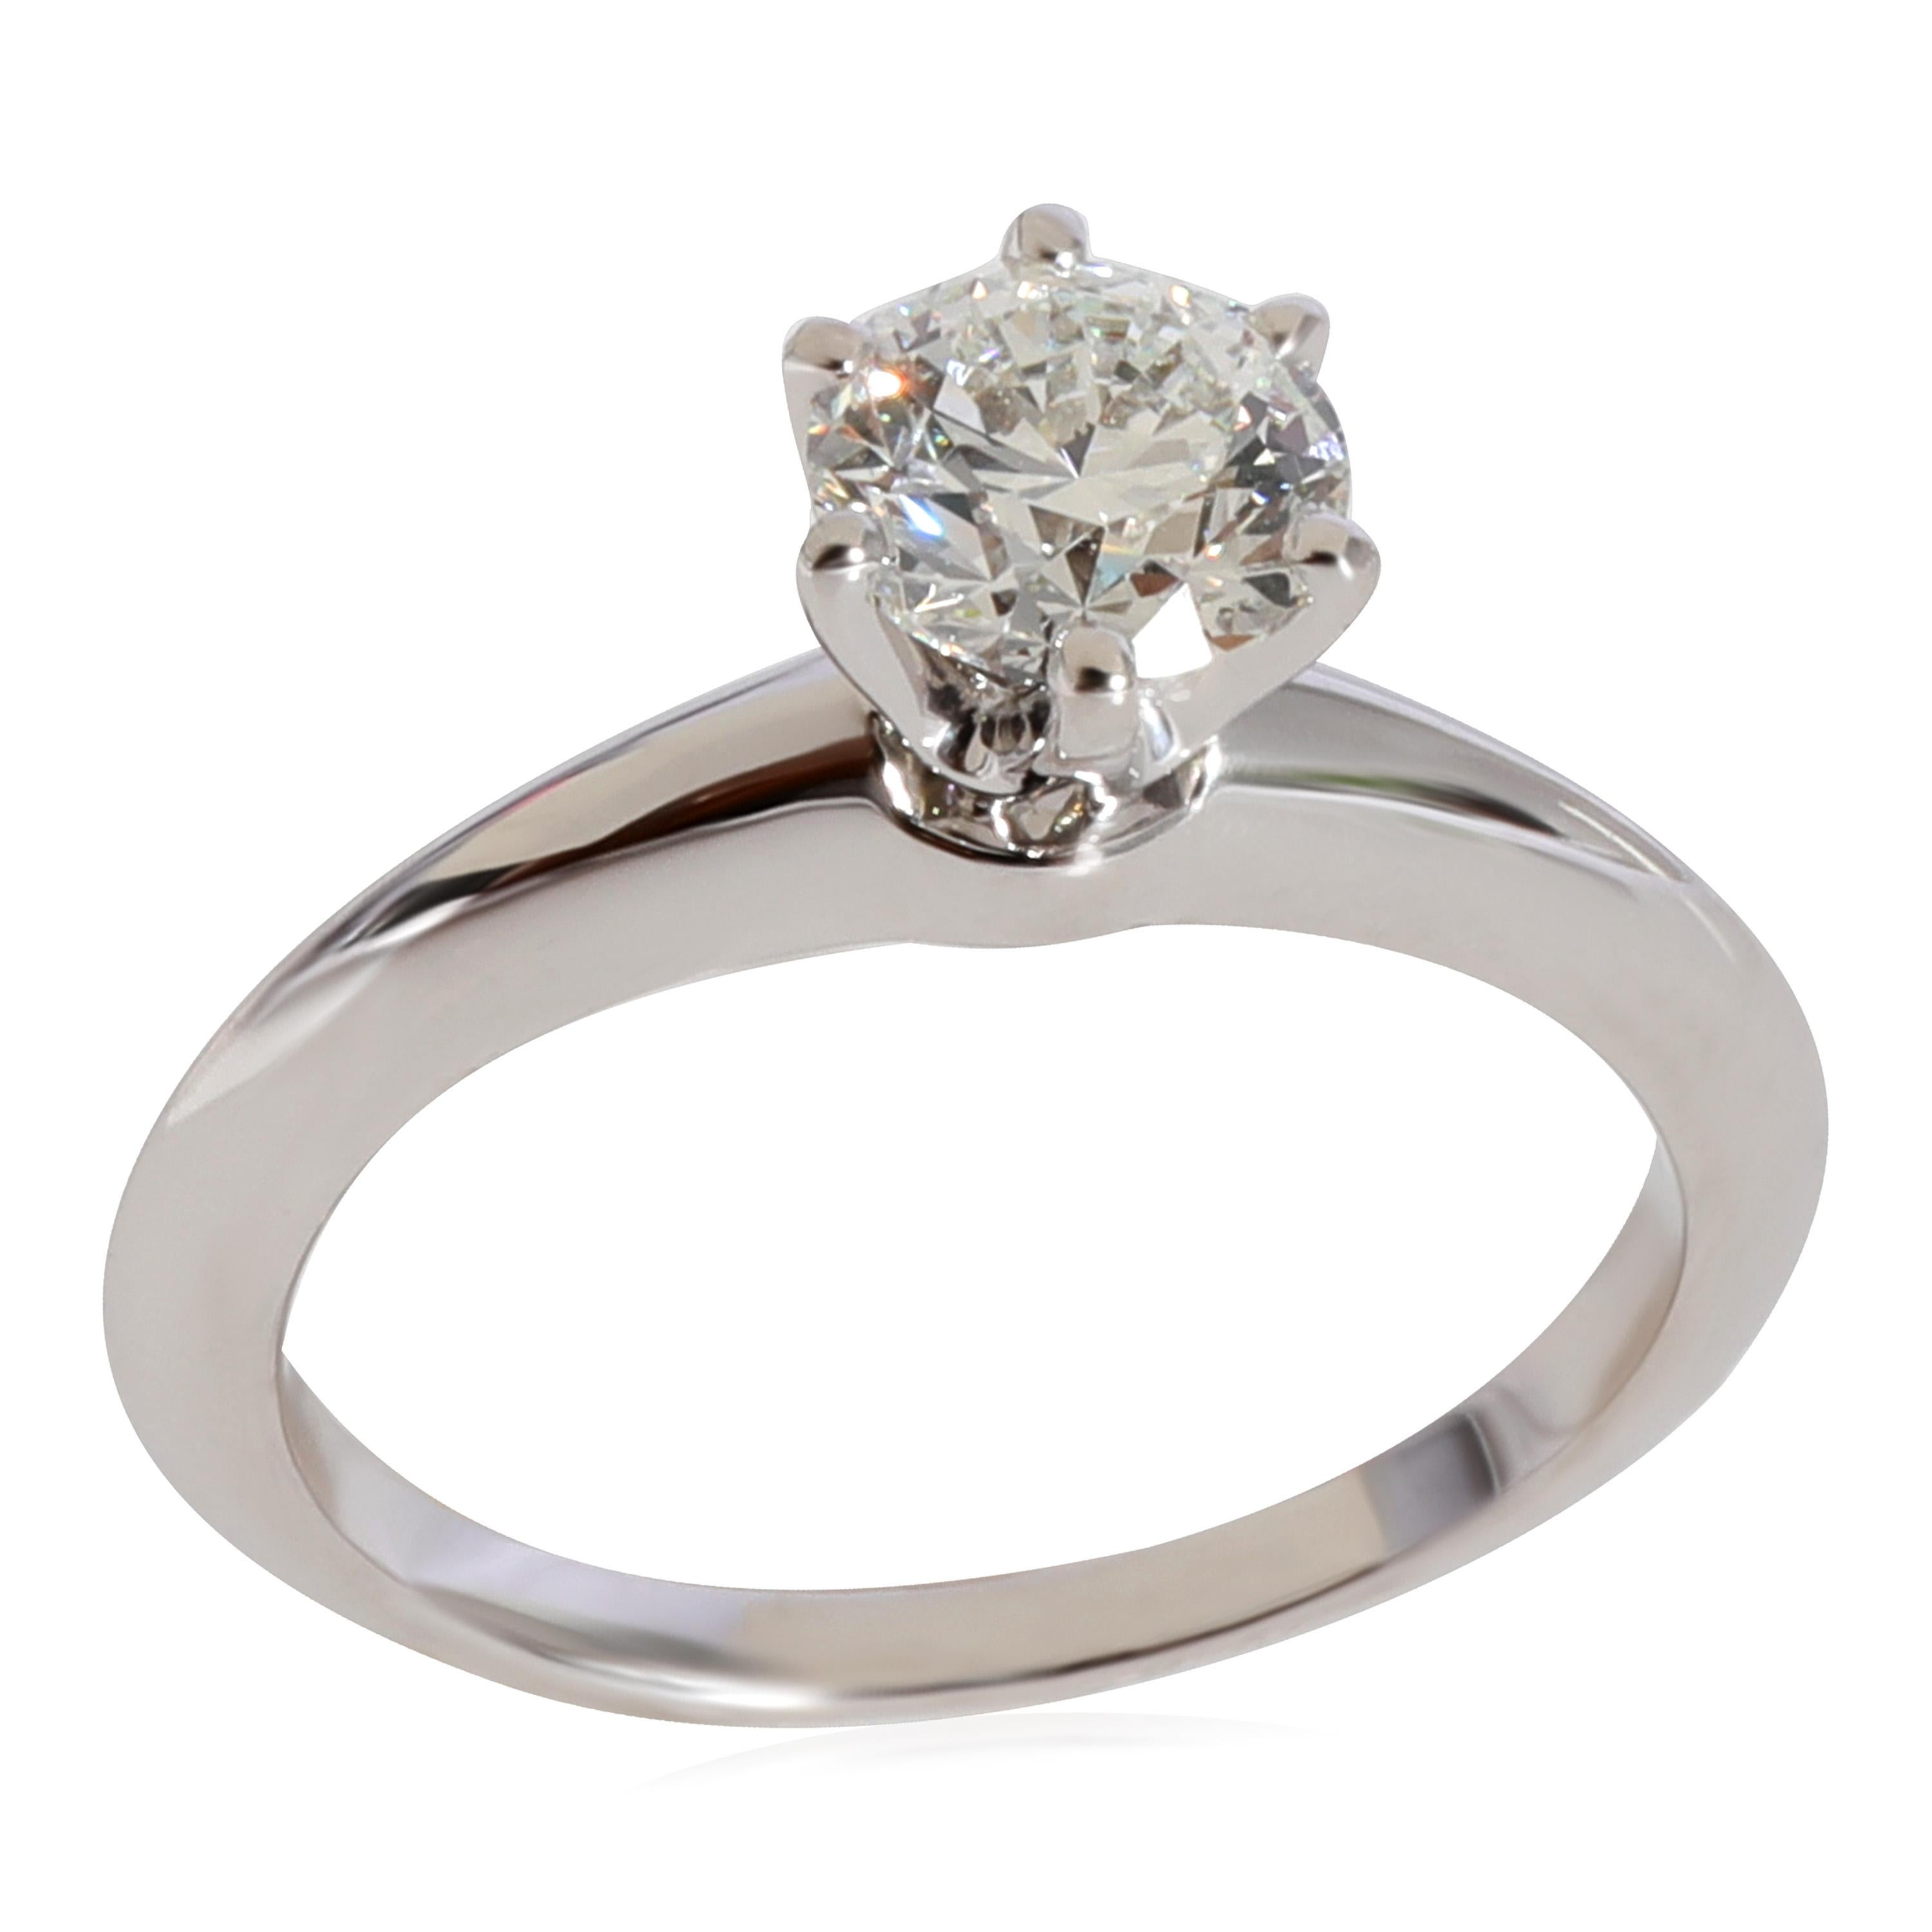 Tiffany & Co. Diamond Solitaire Engagement Ring in Platinum H VS1 0.88 CTW

PRIMARY DETAILS
SKU: 124863
Listing Title: Tiffany & Co. Diamond Solitaire Engagement Ring in Platinum H VS1 0.88 CTW
Condition Description: Retails for 9720 USD. In